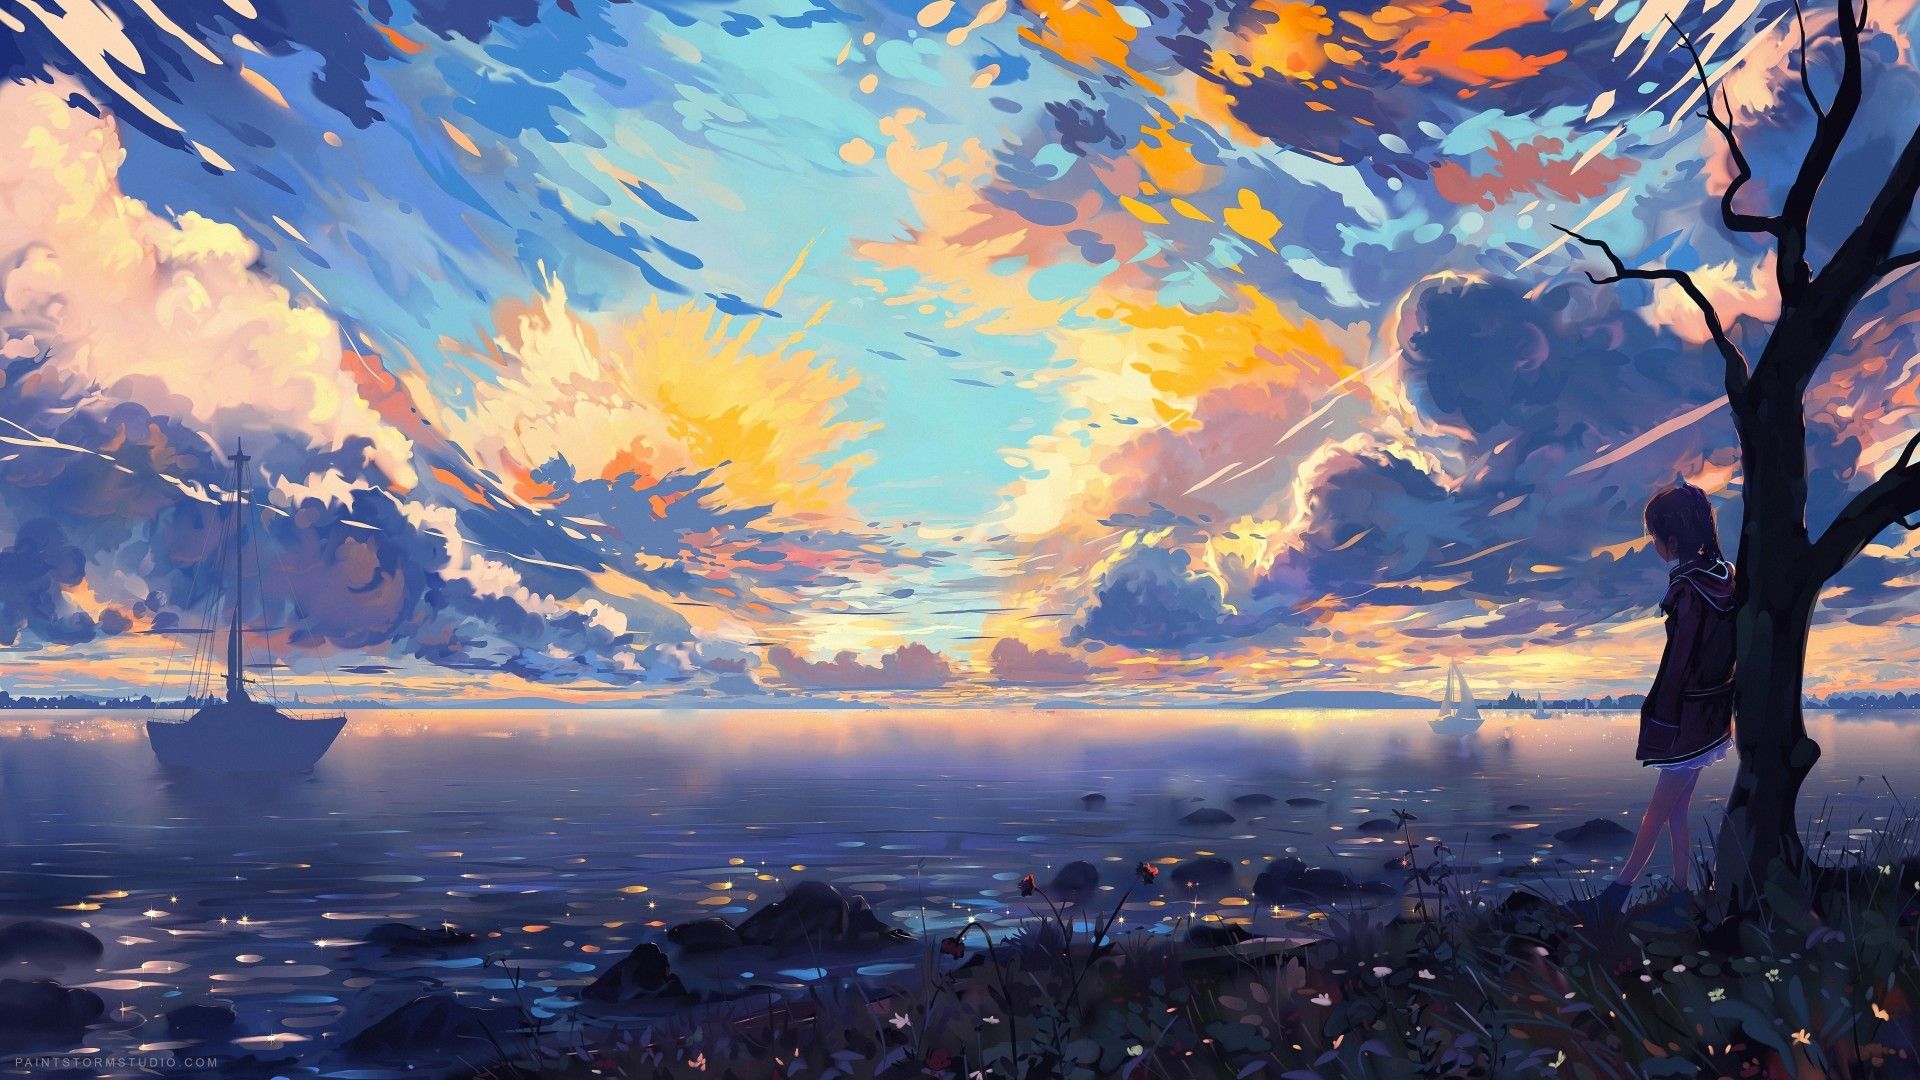 Download 1920x1080 Anime Landscape, Sea, Ships, Colorful, Clouds